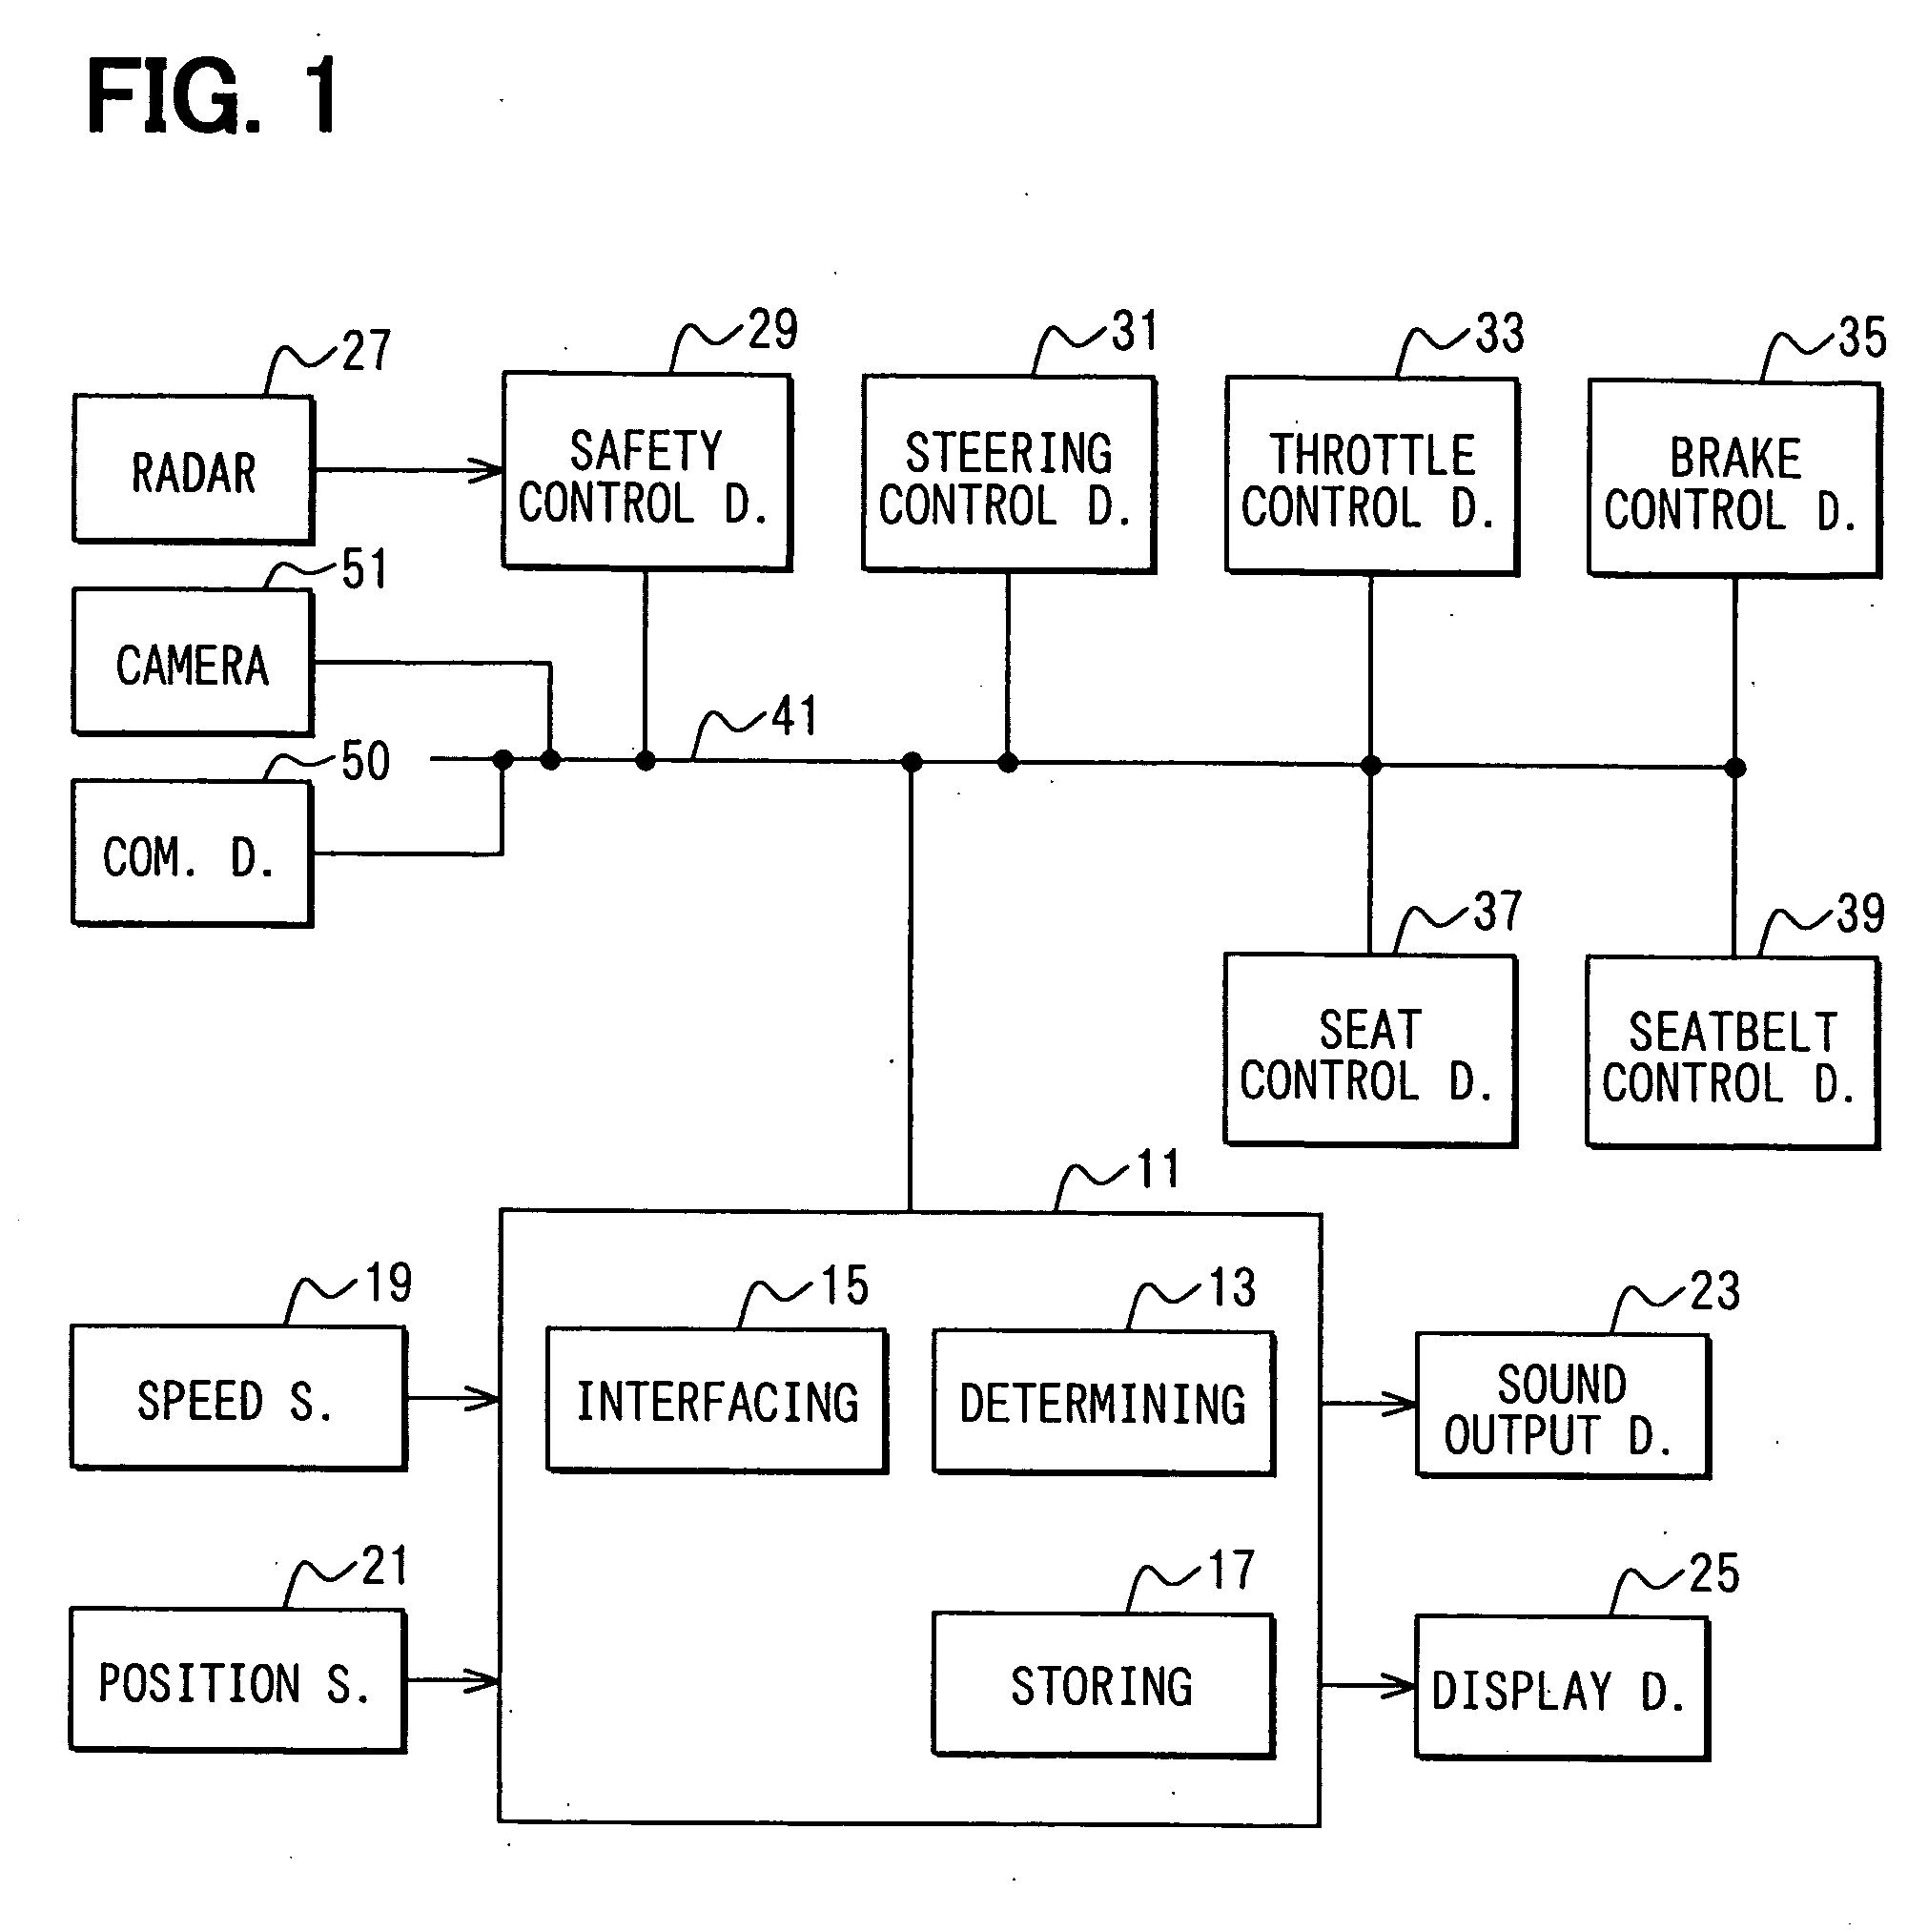 Driving state determining system